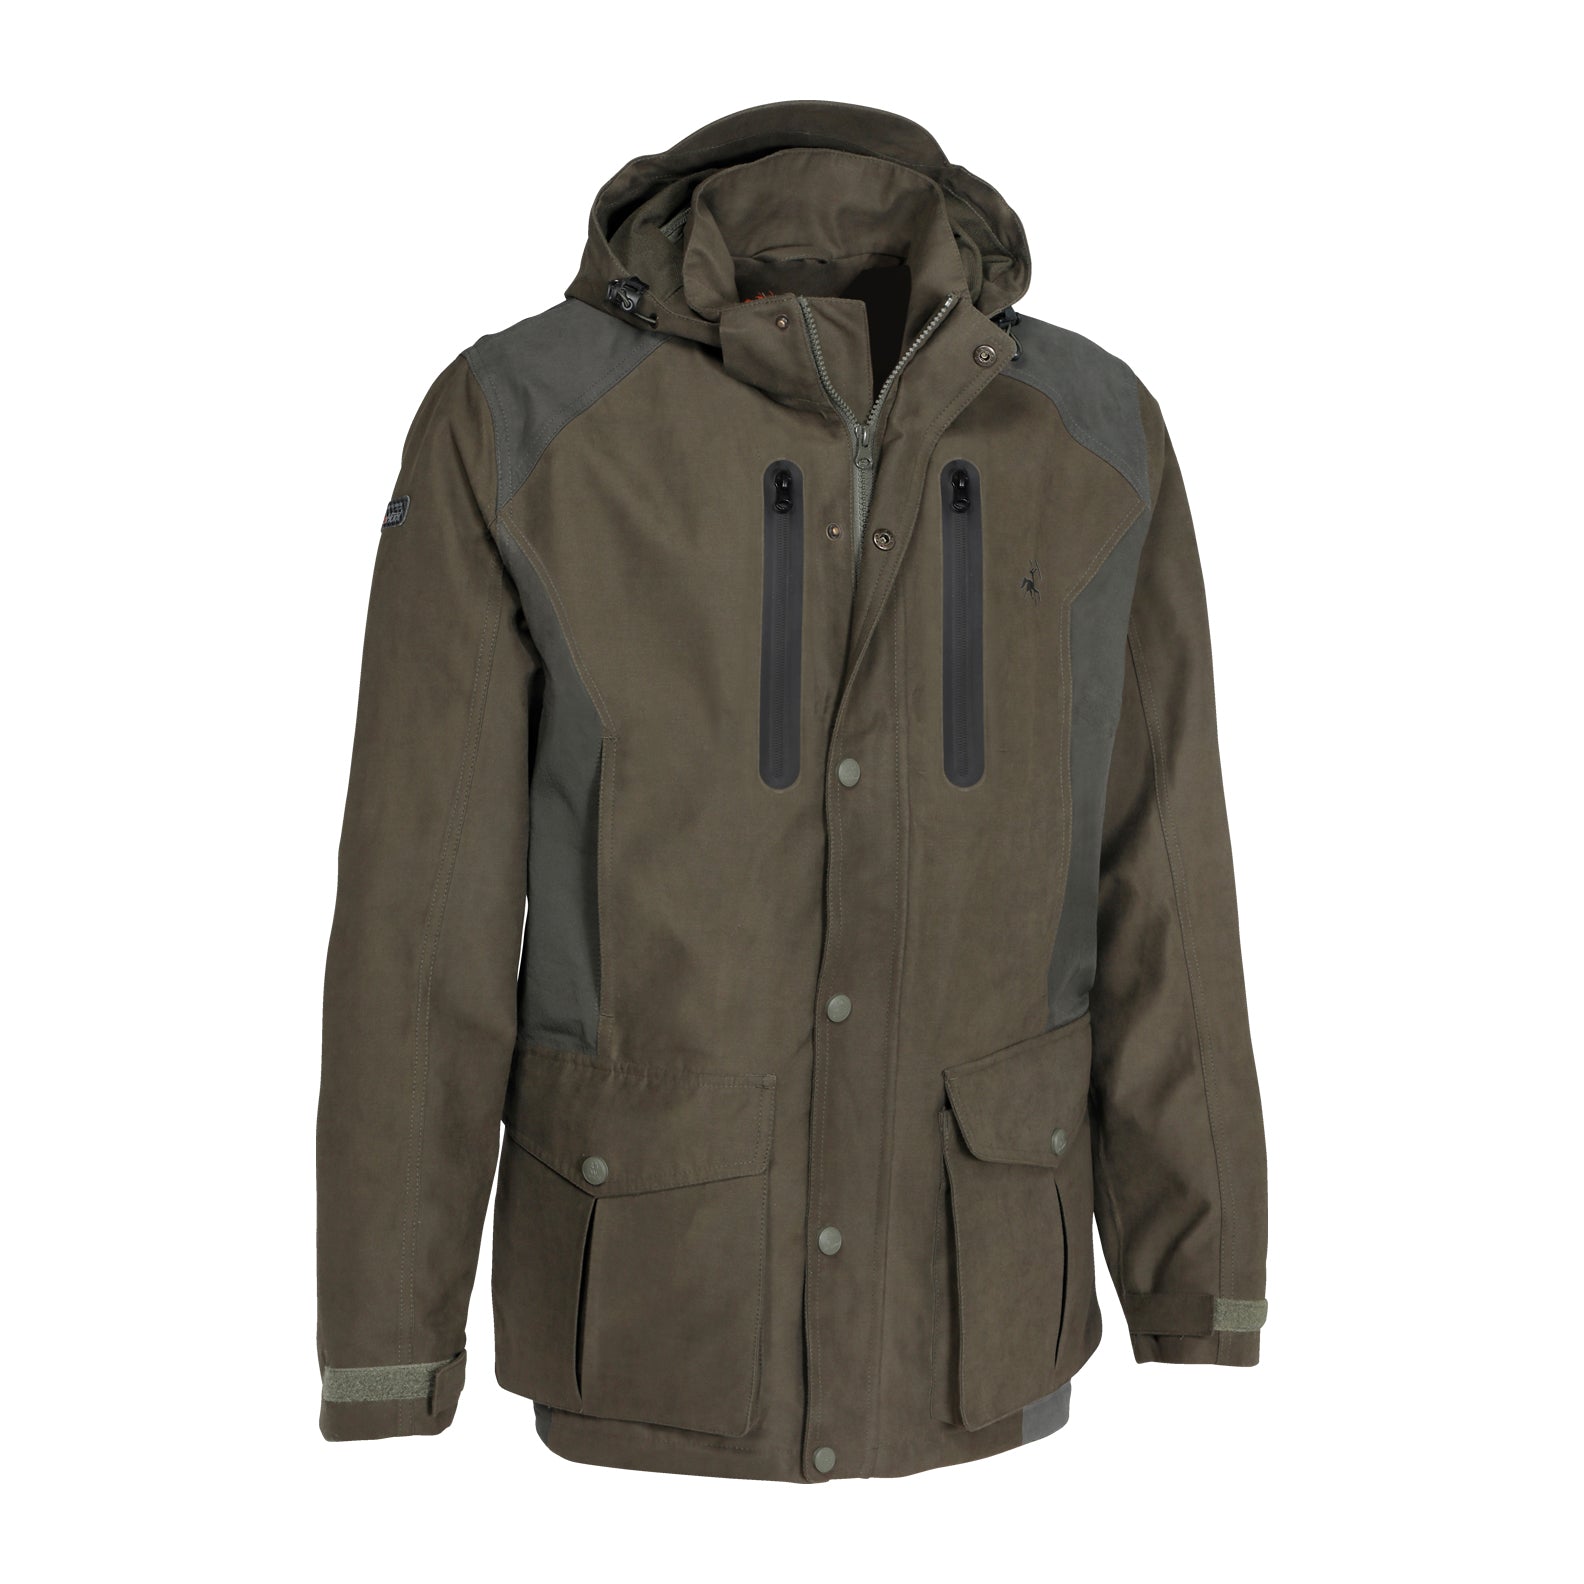 Verney Carron Falcon Jacket | New Forest Clothing